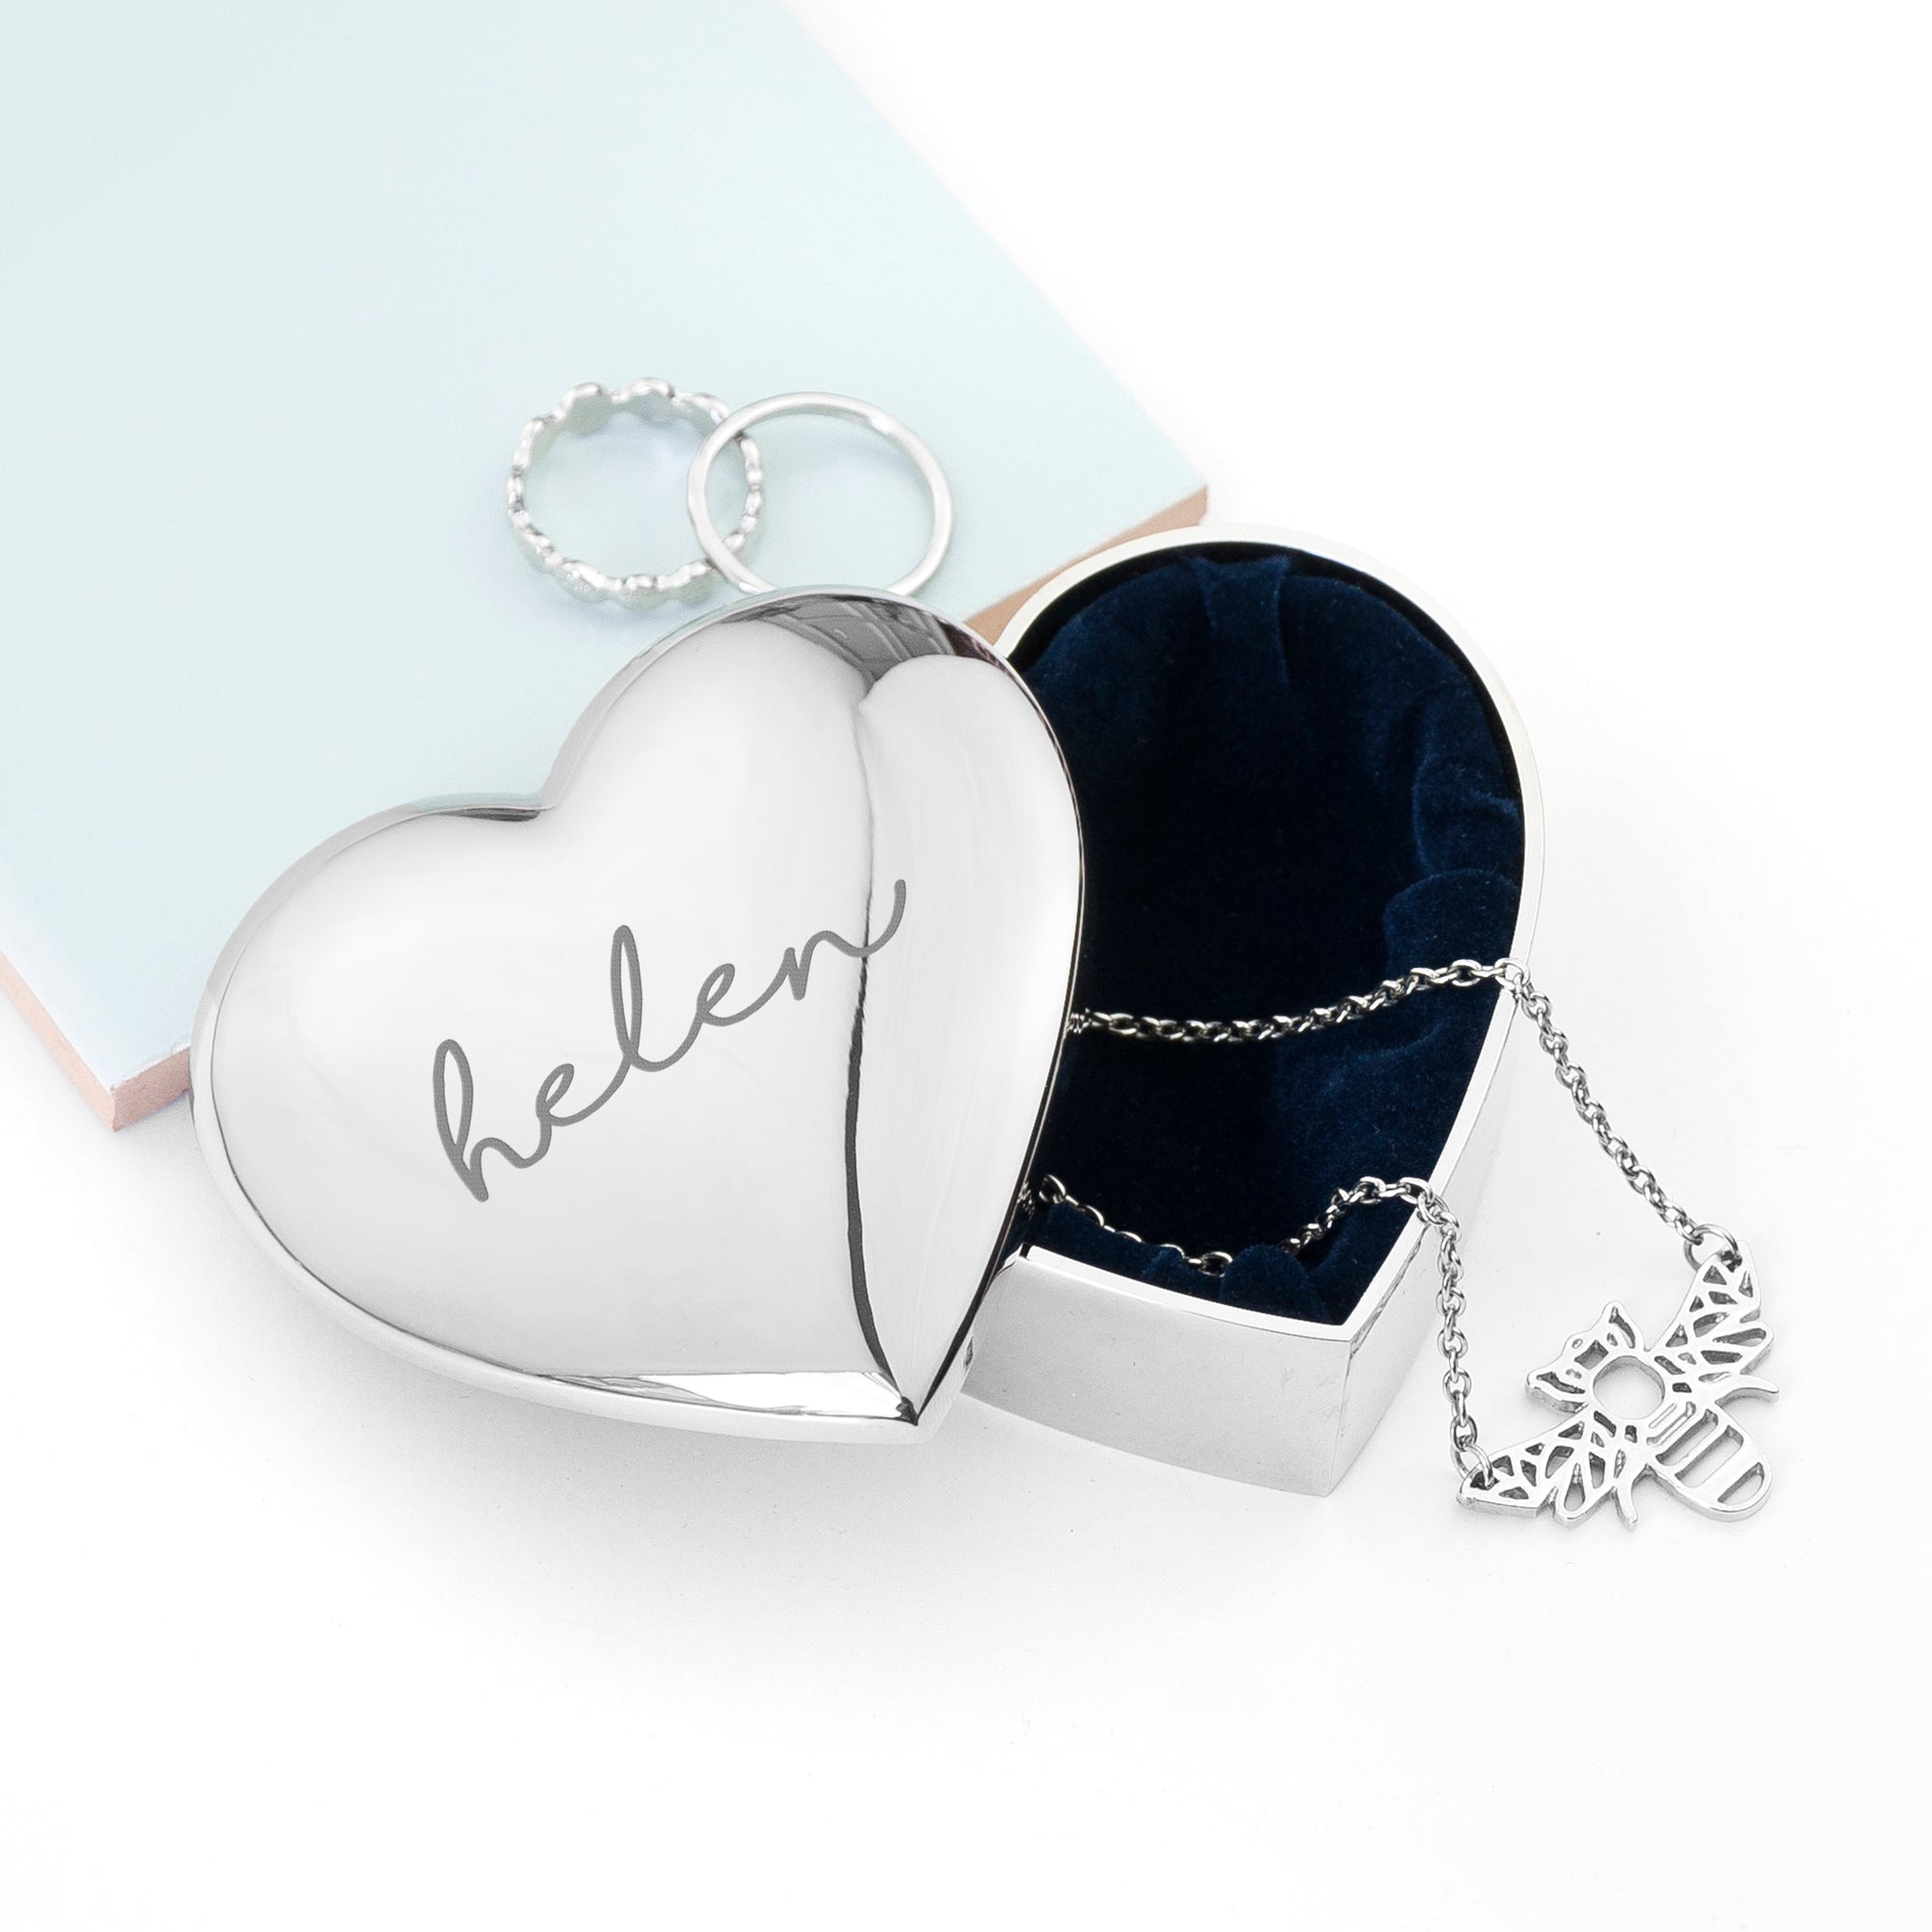 Personalised Heart Shaped Trinket Box in Silver